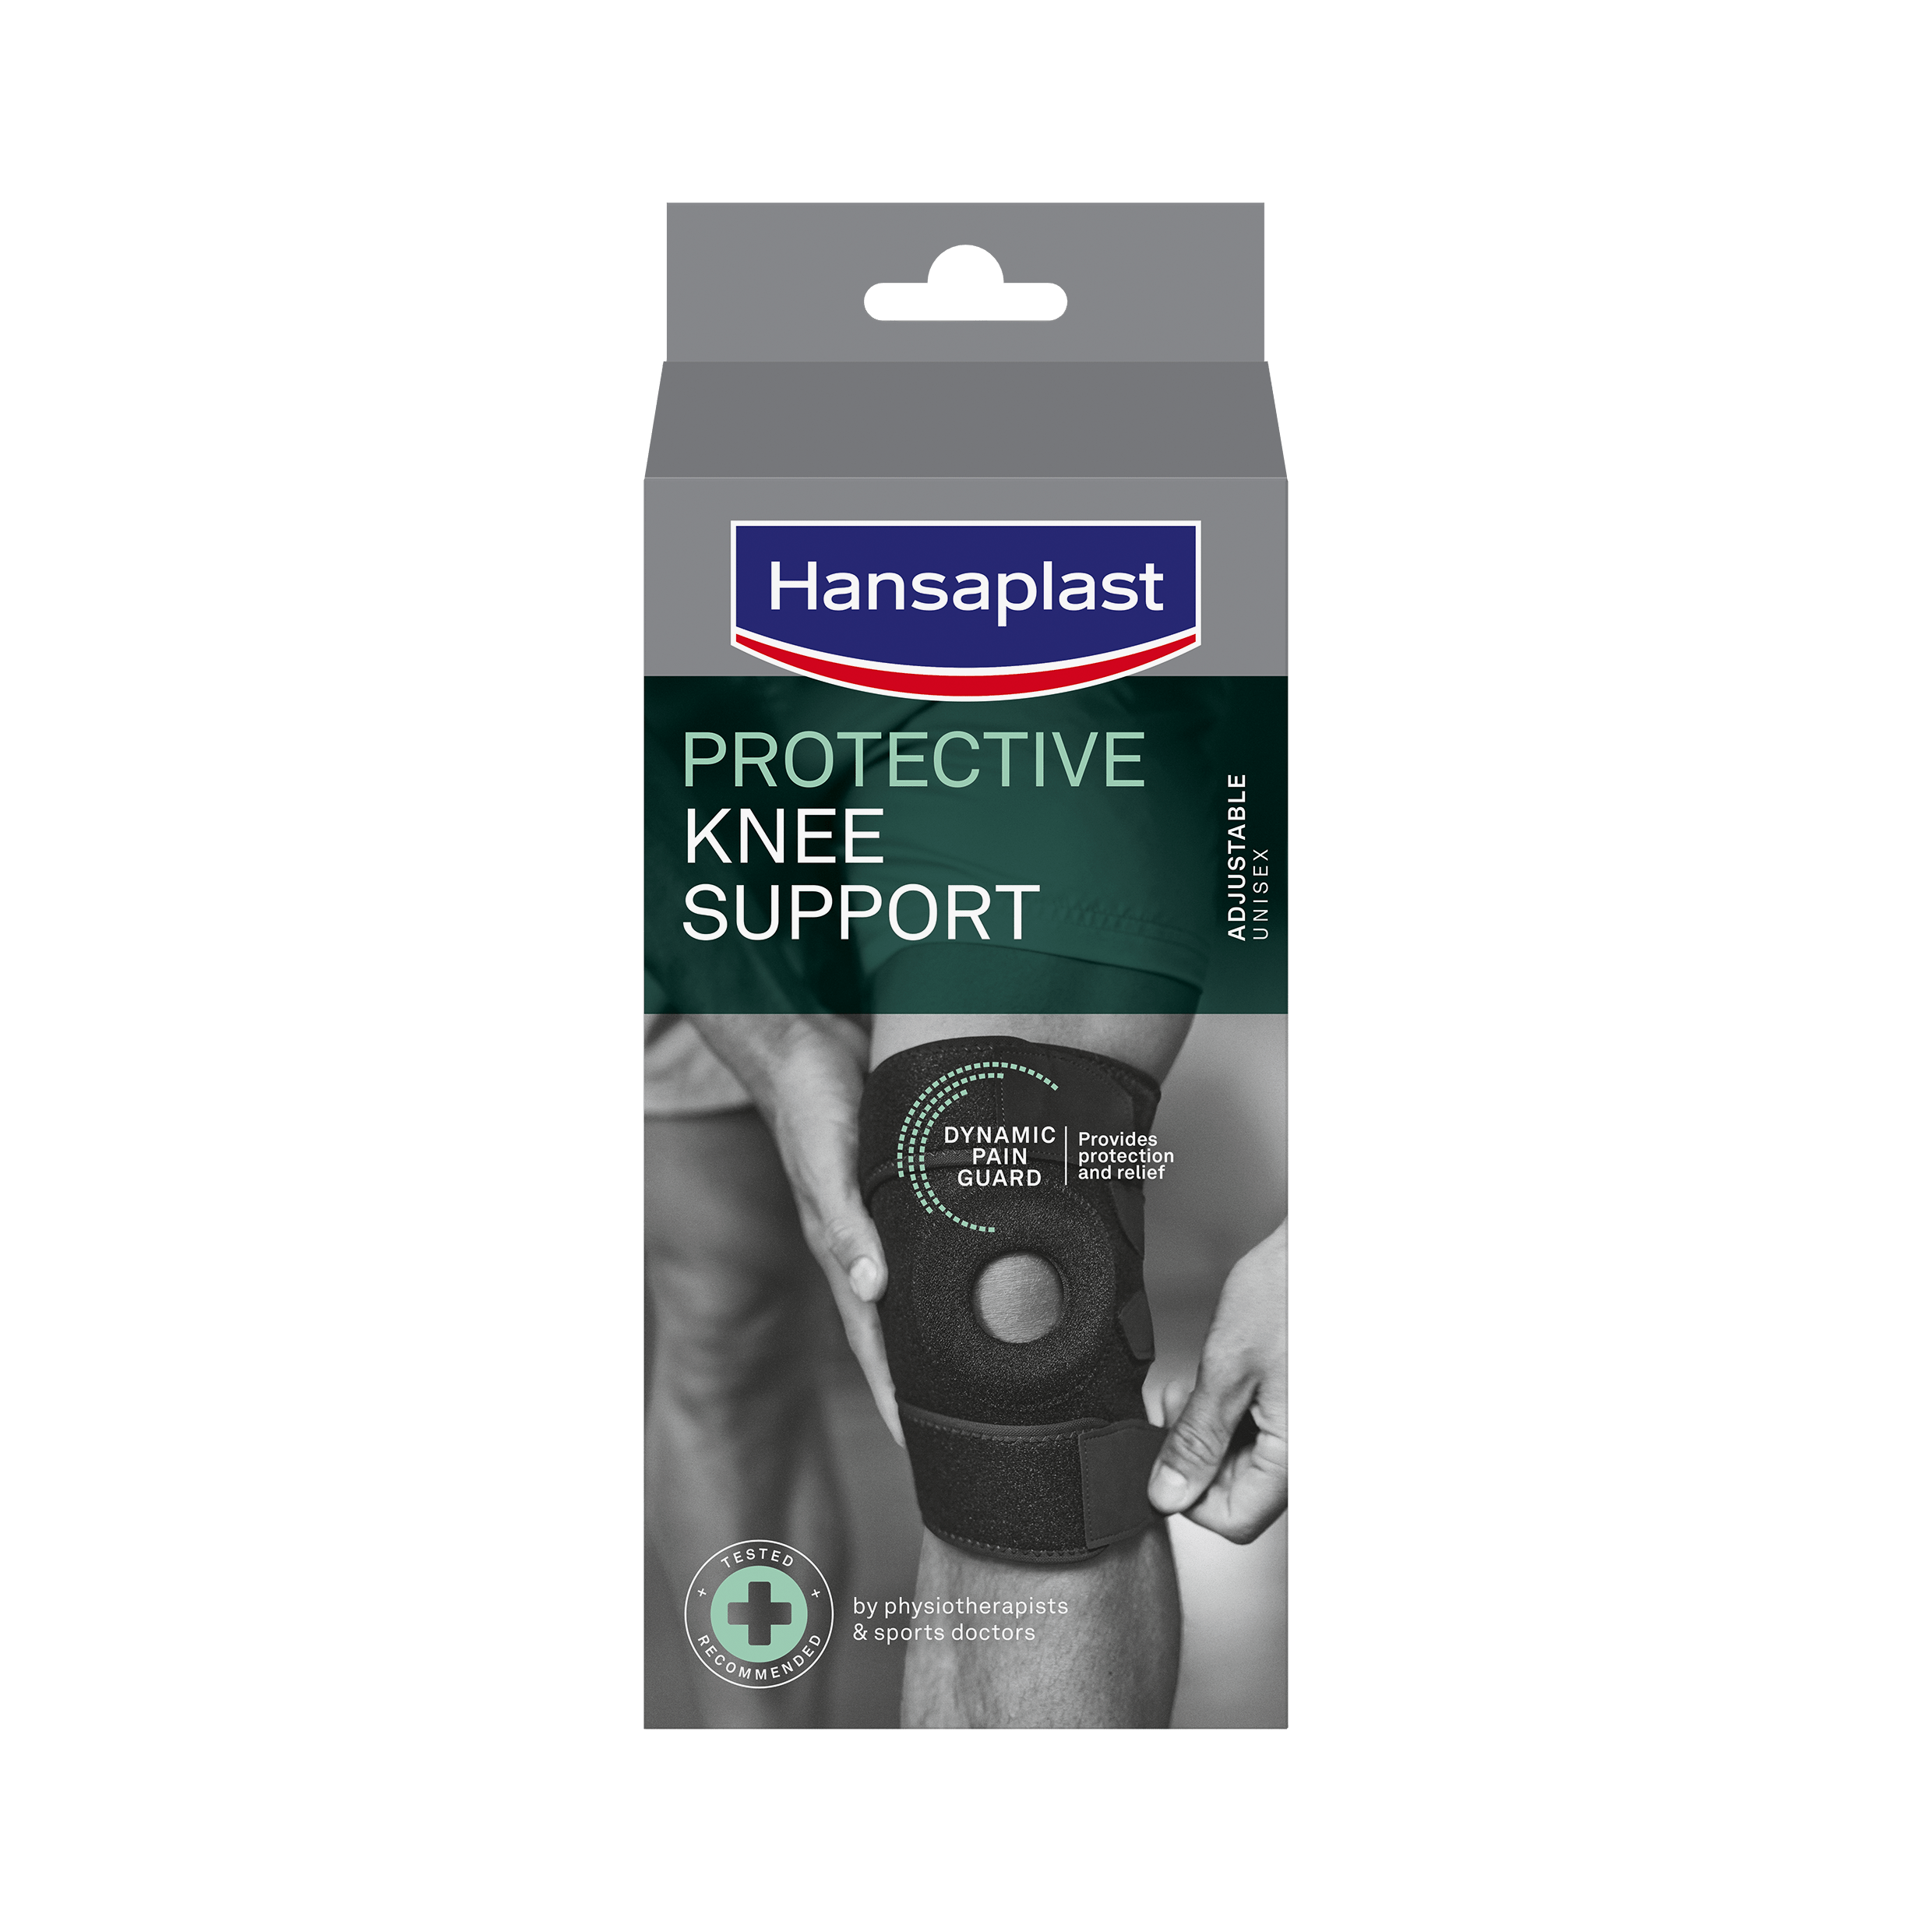 https://images-us.eucerin.com/~/media/hansaplast/sports-relaunch/02580_protective_knee_support_hansaplast_front_2480x2480px.png